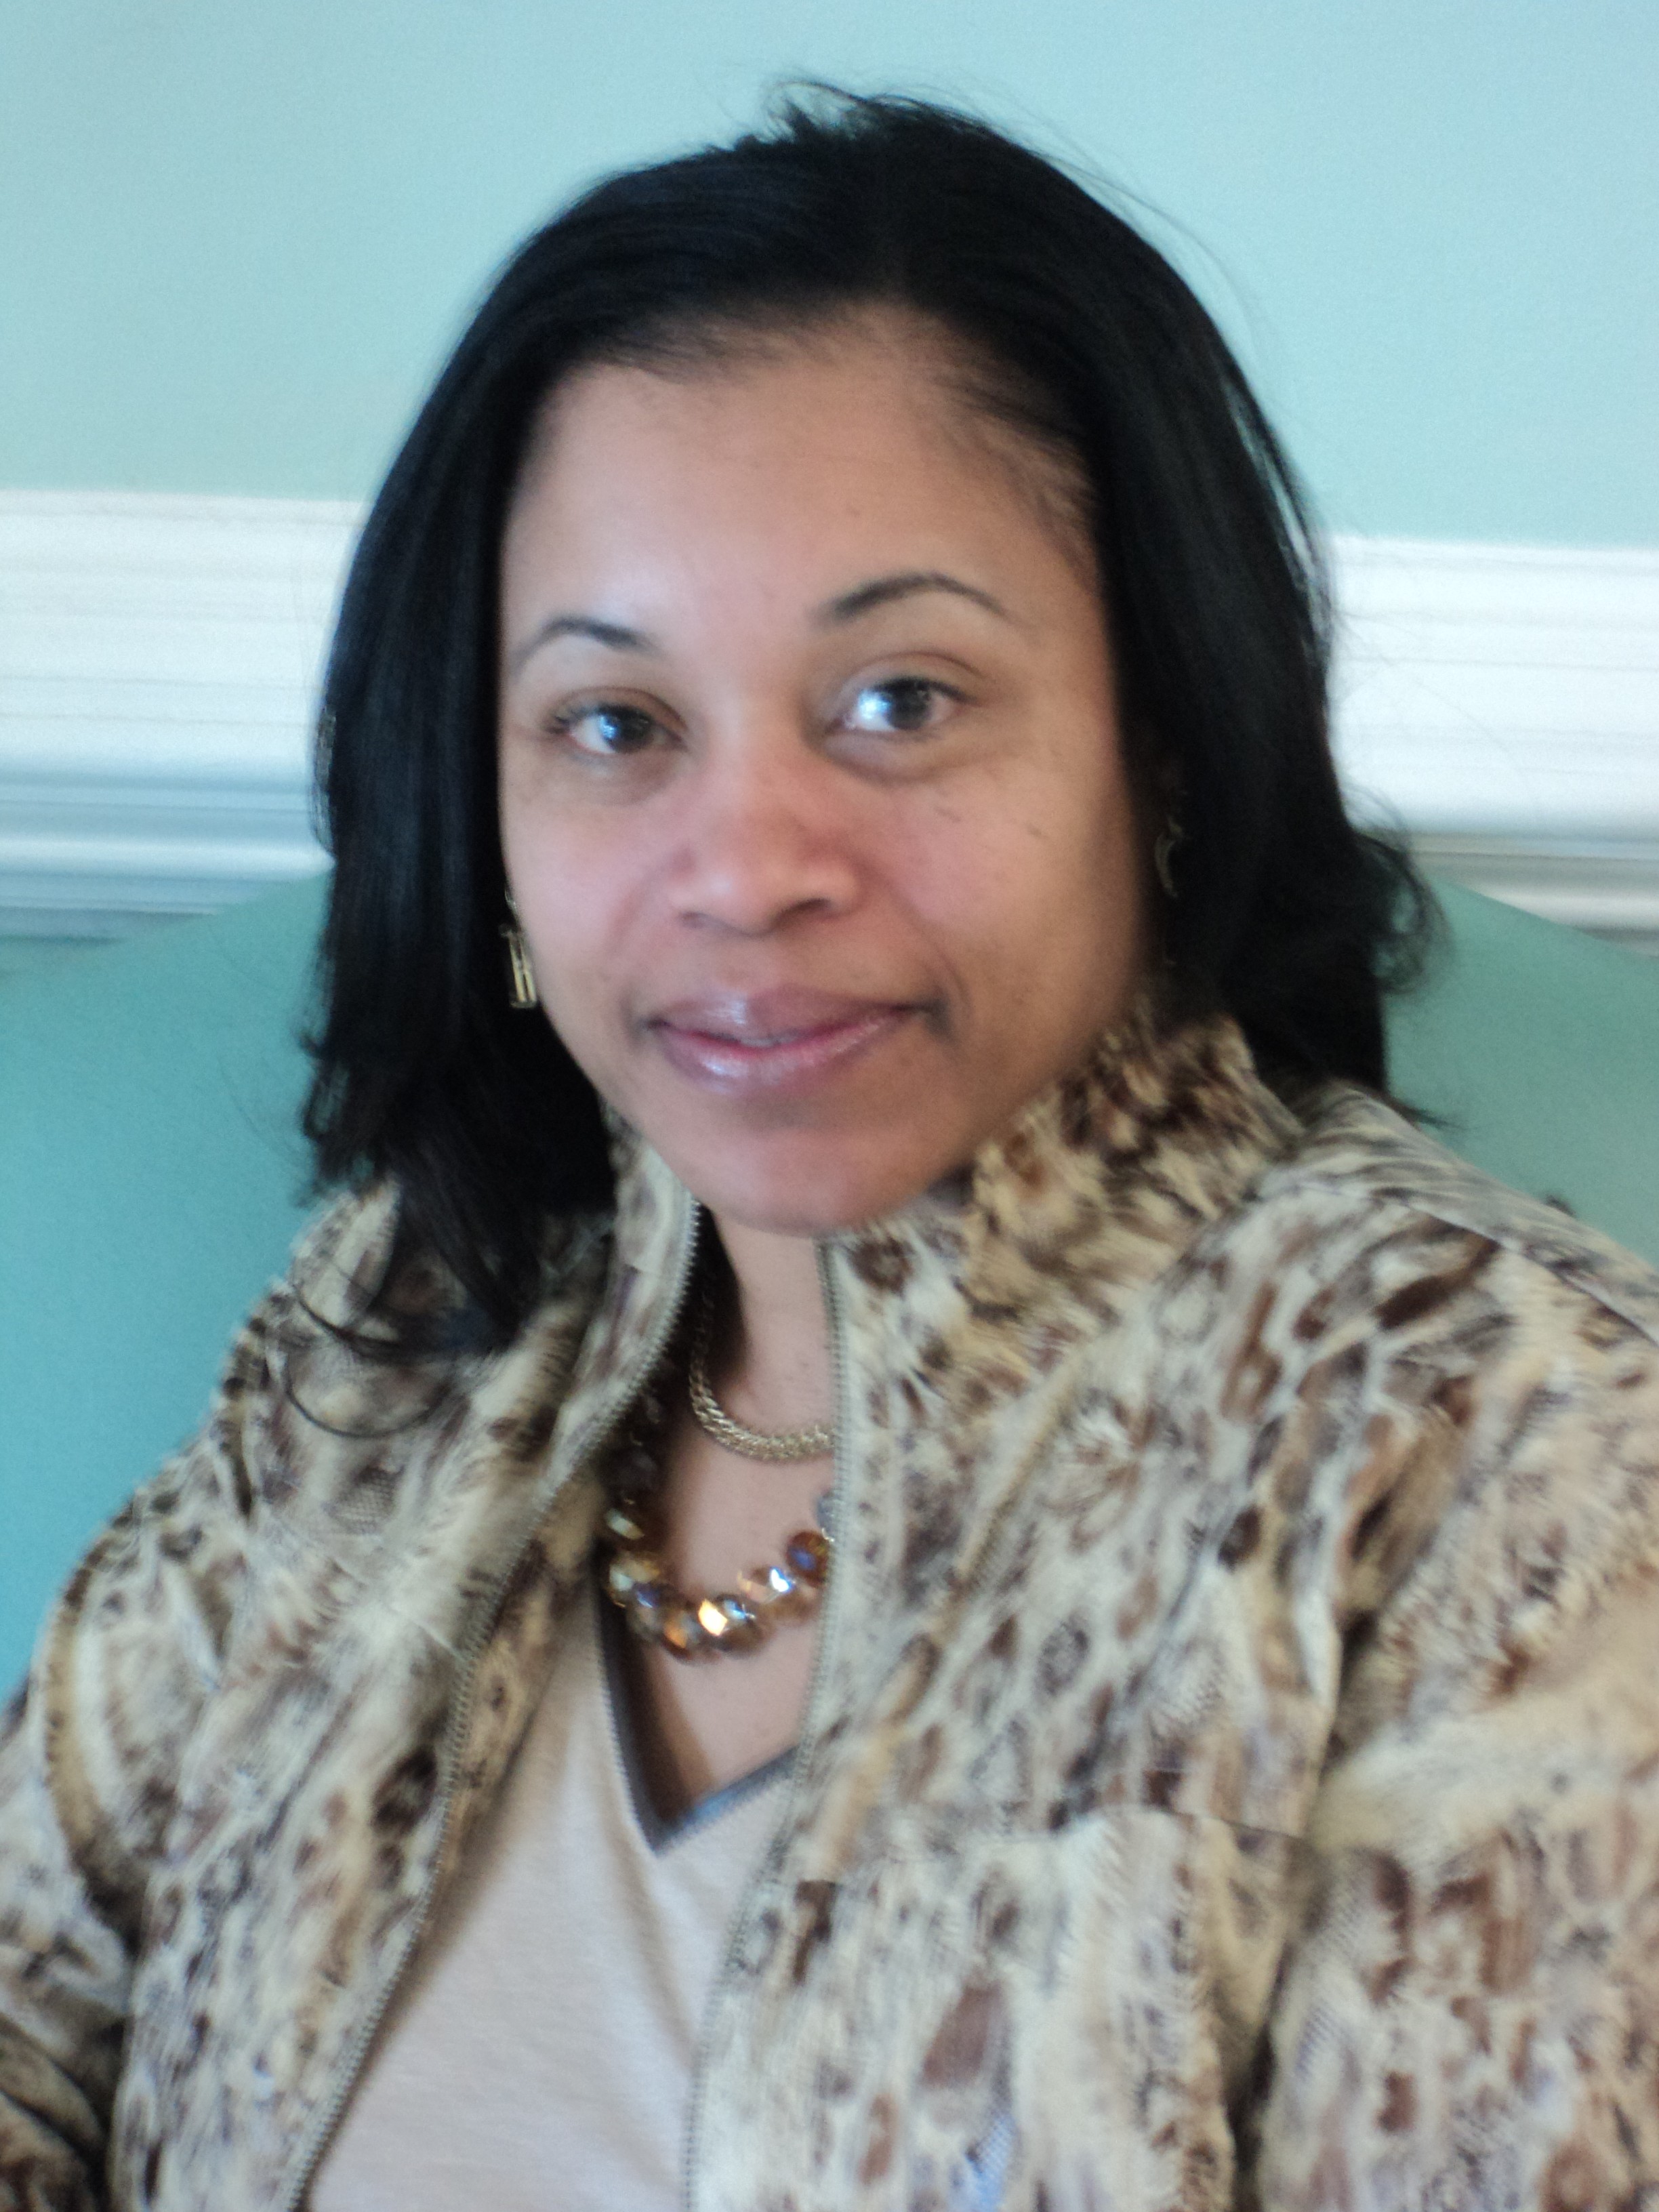 Former MLK recipient, Melissa Vaughn-Oden is the proud owner of four companies: The Place at Deans Bridge, The Place at Pooler, The Place at Martinez, ... - melissa-oden-1dsc03367-e1396281419472